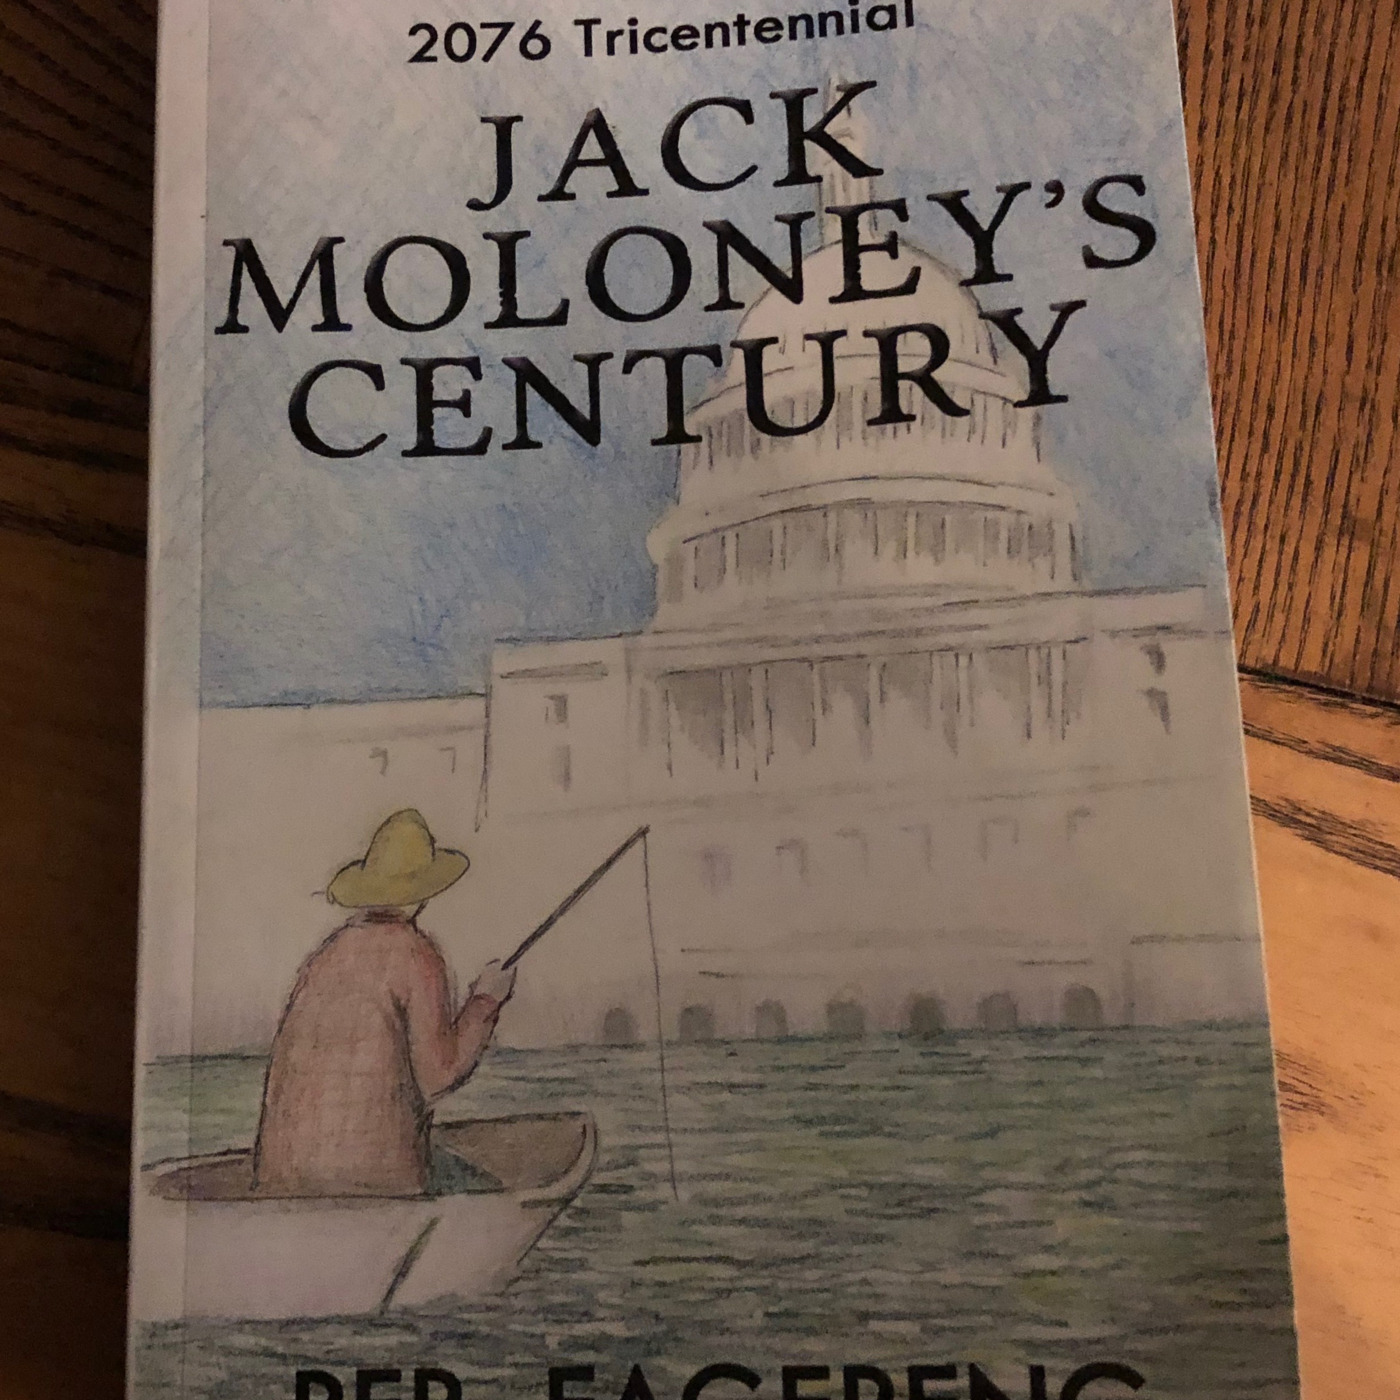 Jack Moloney’s Century: A Conversation with Per Fagereng